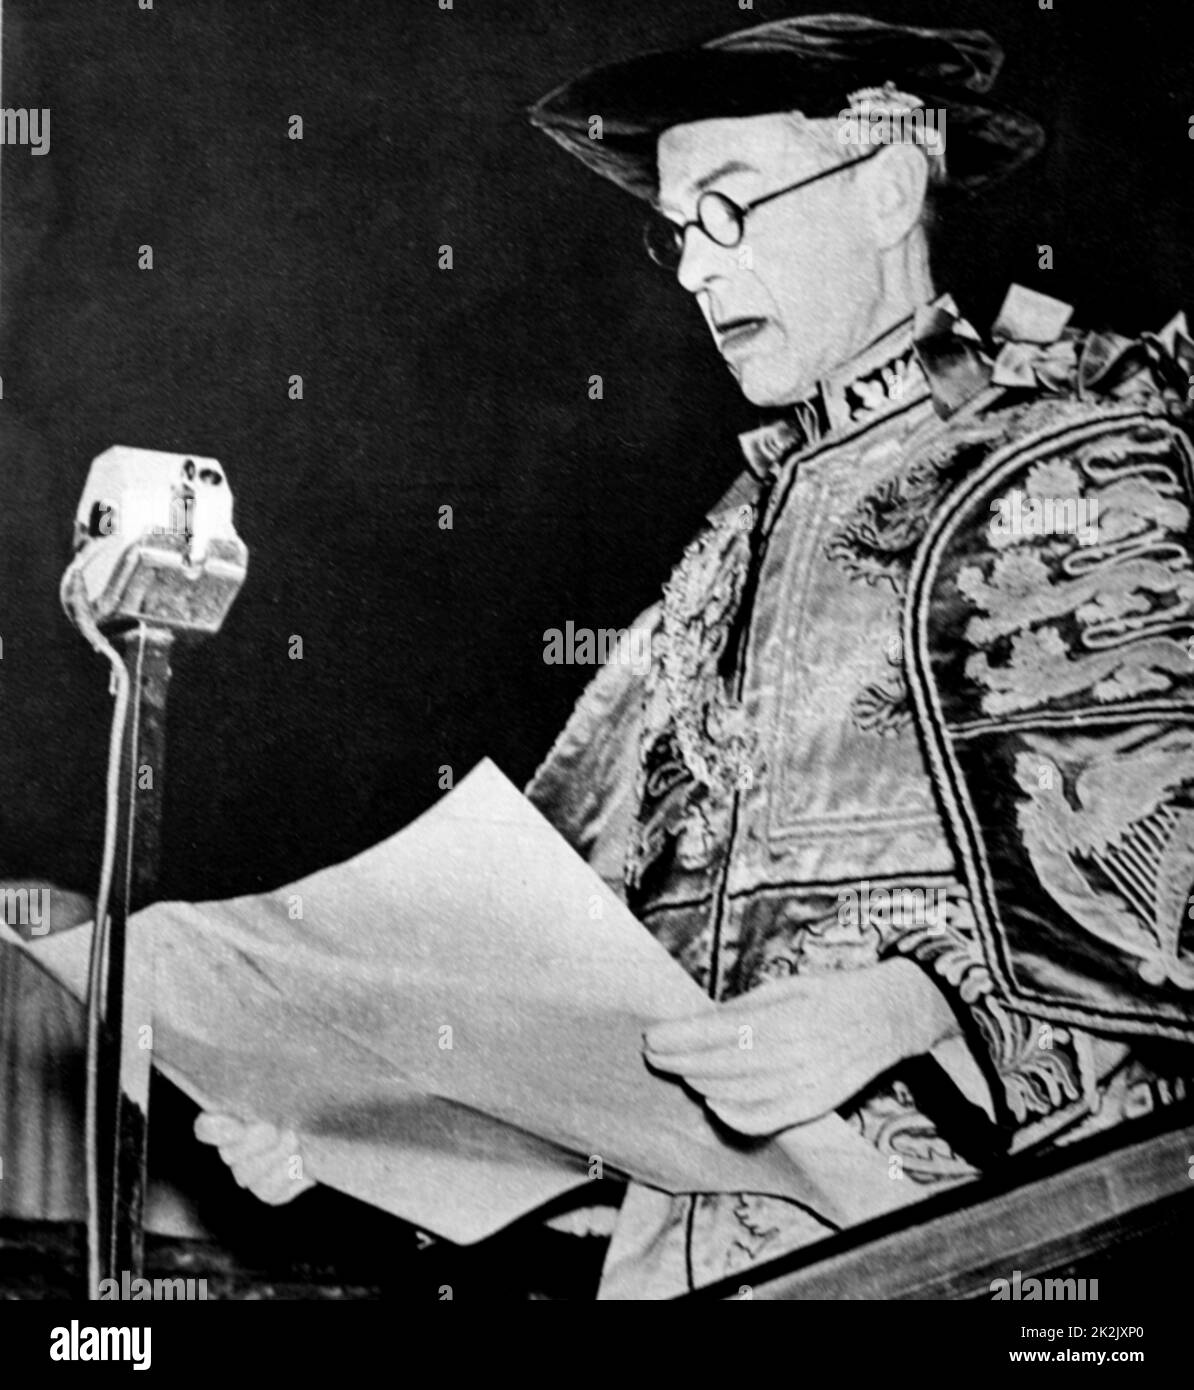 Announcement of the new King, King Edward VIII (1894-1972)  King of the United Kingdom and the Dominions of the British Empire, and Emperor of India, until his abdication. Dated 20th Century Stock Photo